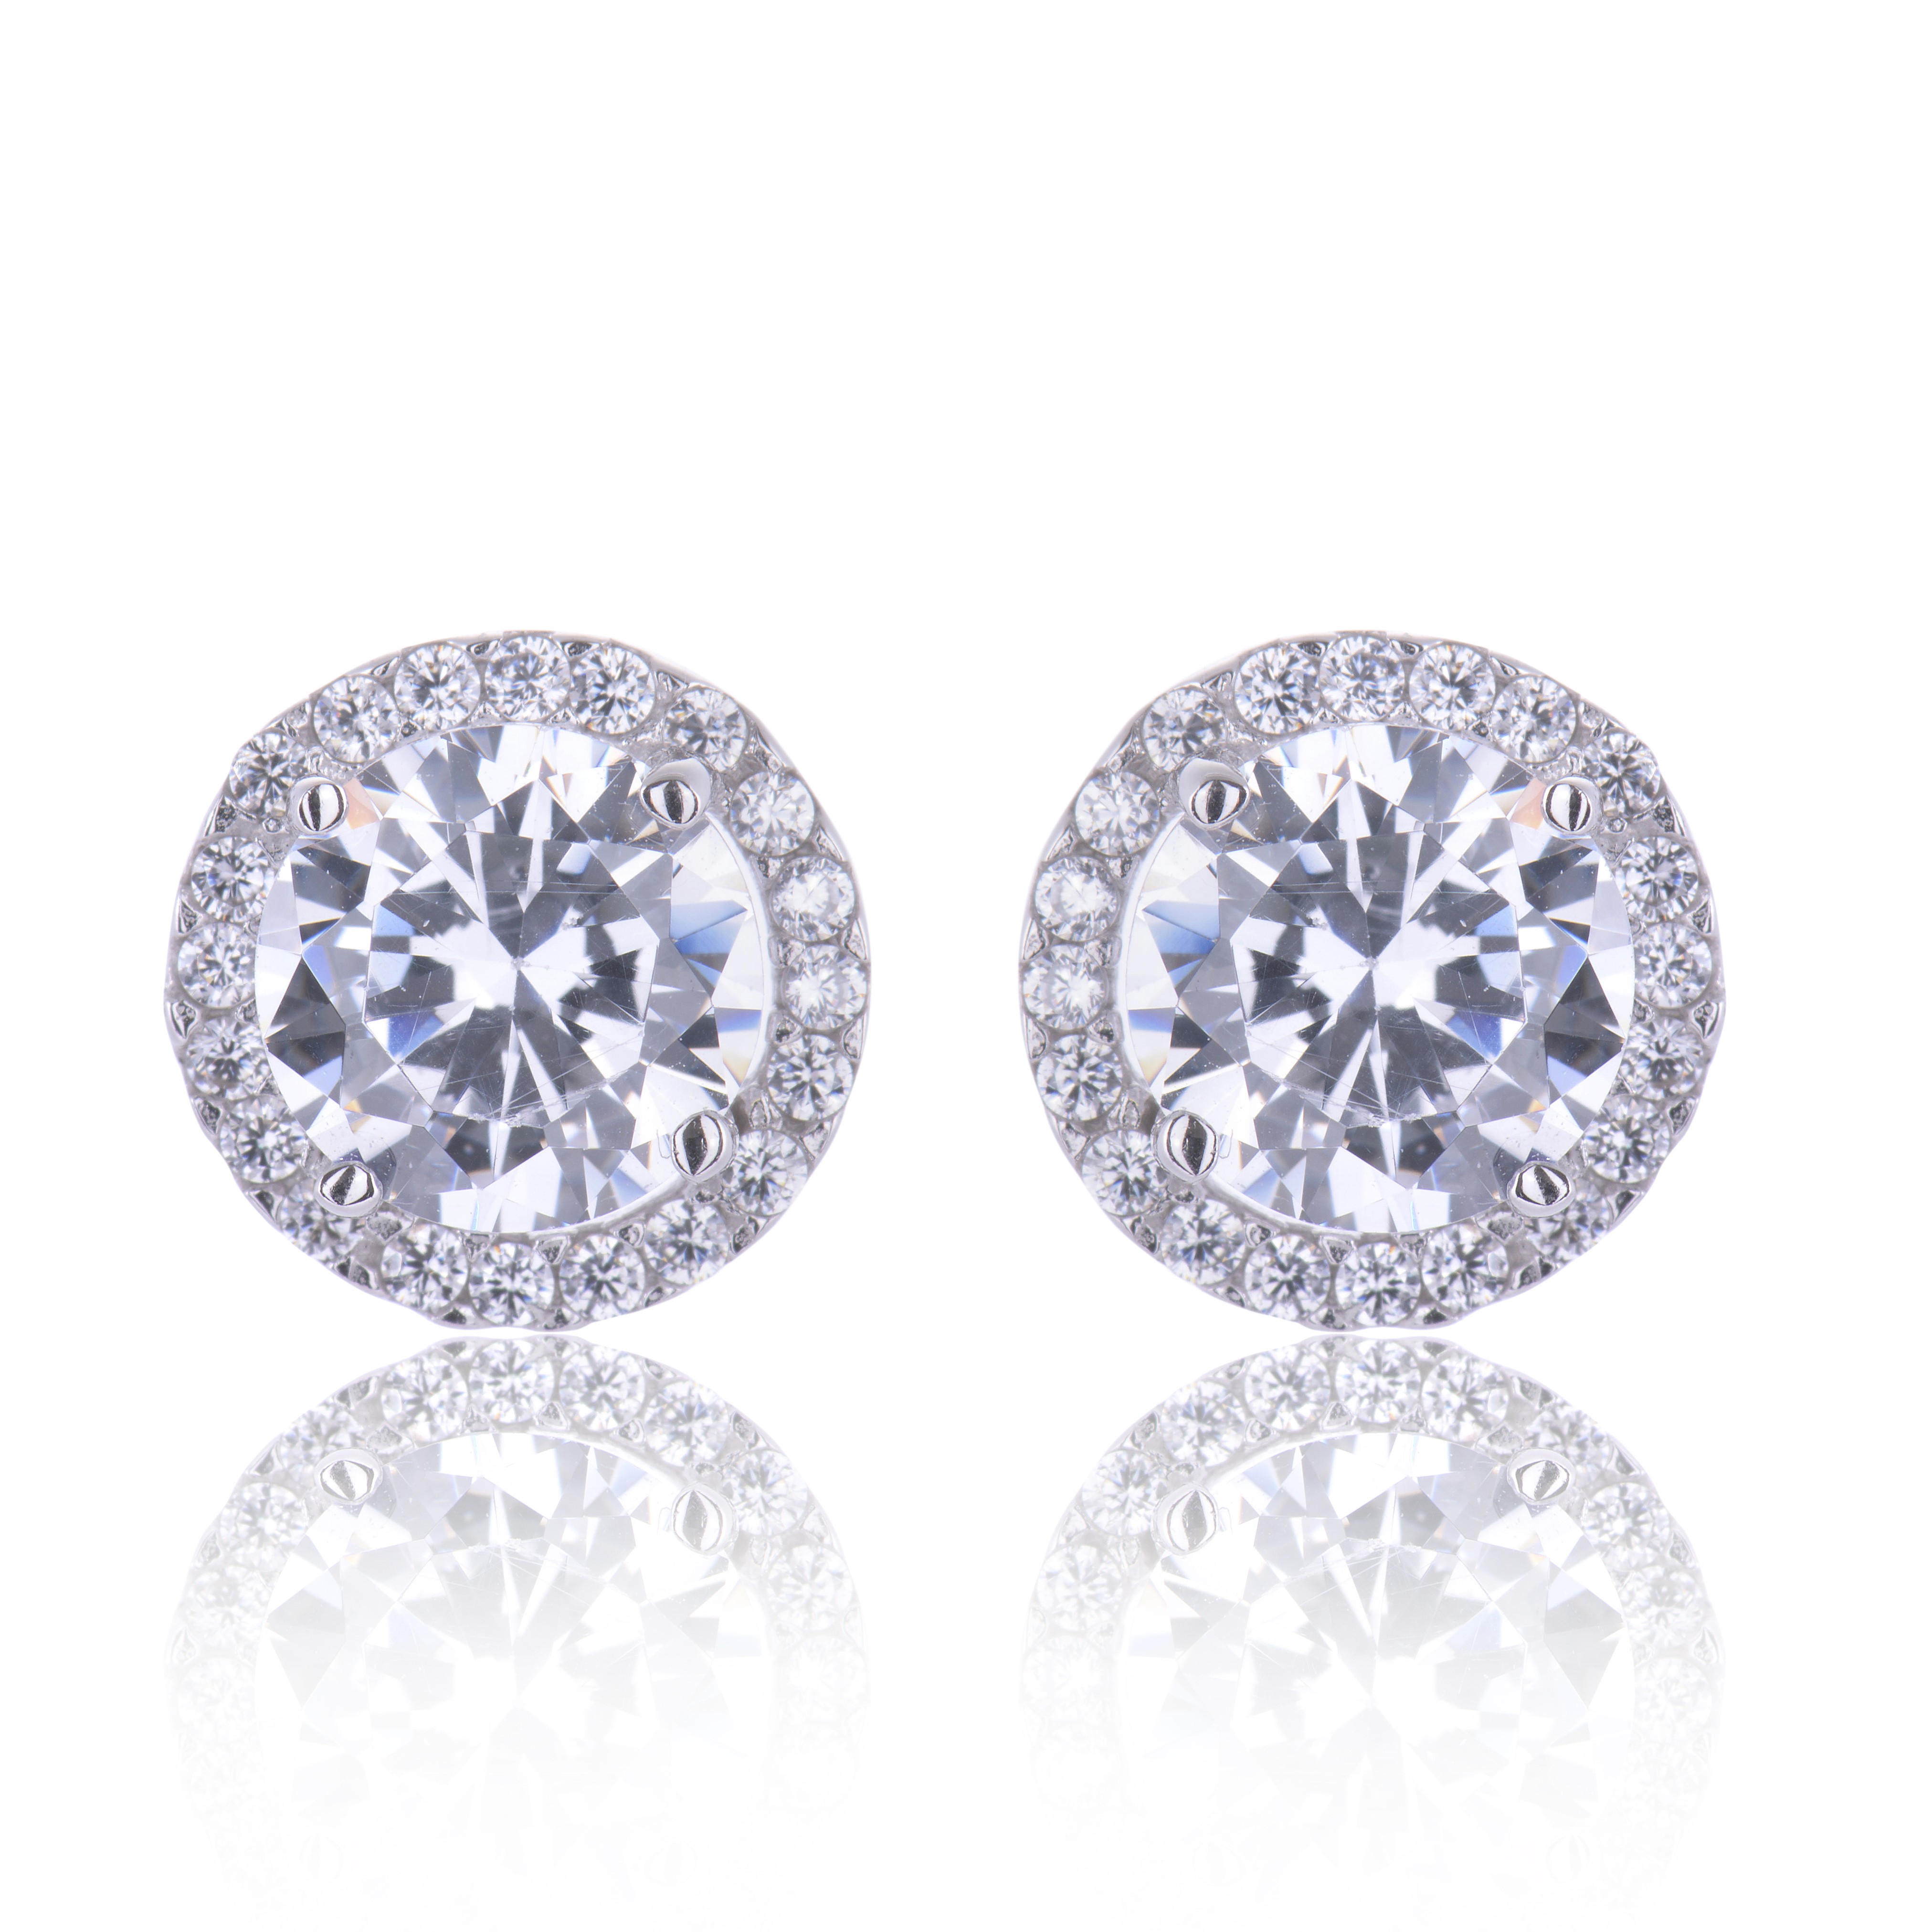 1 Ct Round Diamond Solitaire Earrings 14K White Gold 